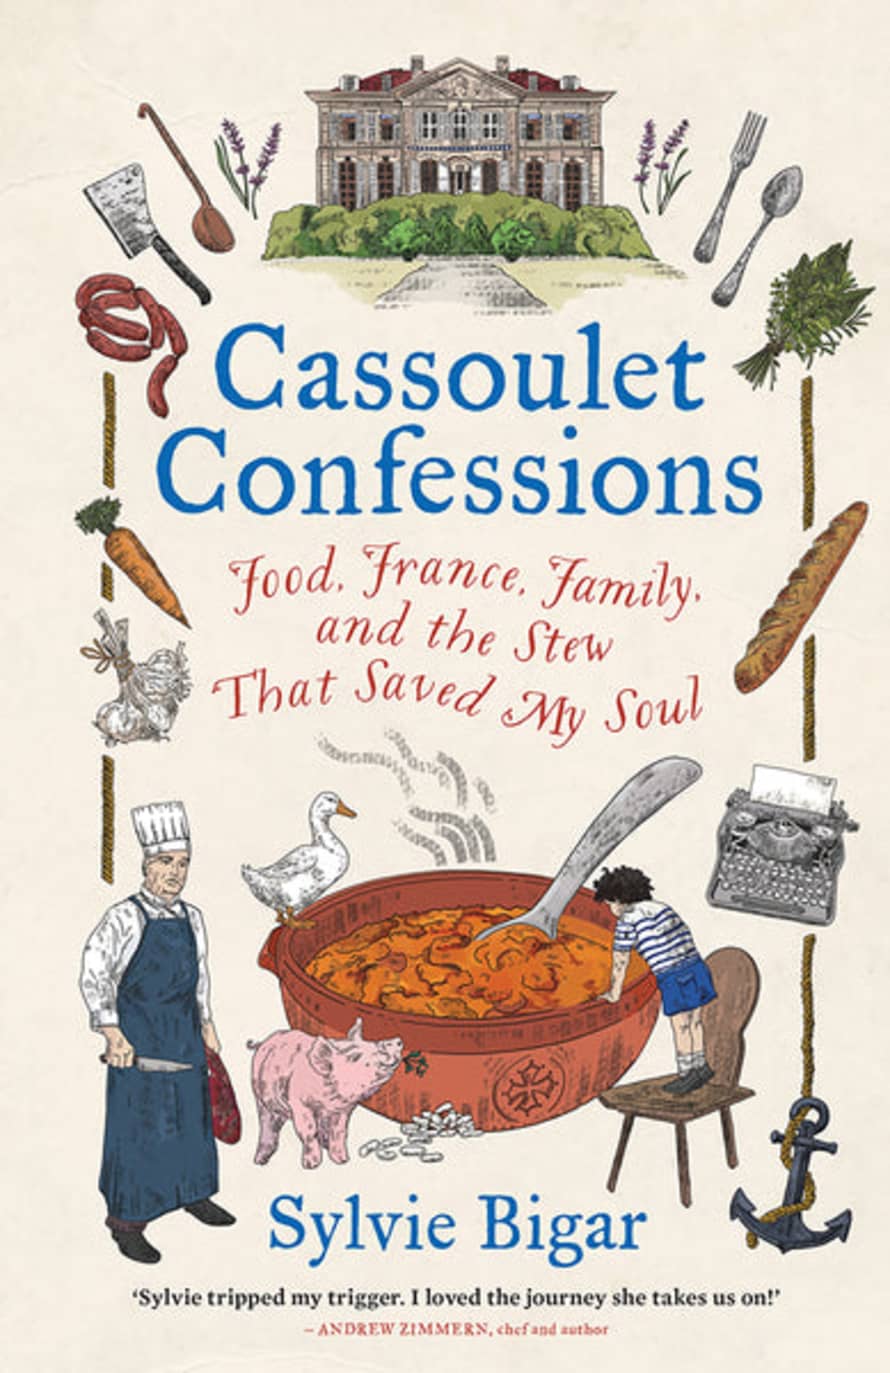 Hardie Grant Cassoulet Confessions: Food, France, Family And The Stew That Saved My Soul Book by Sylvie Bigar